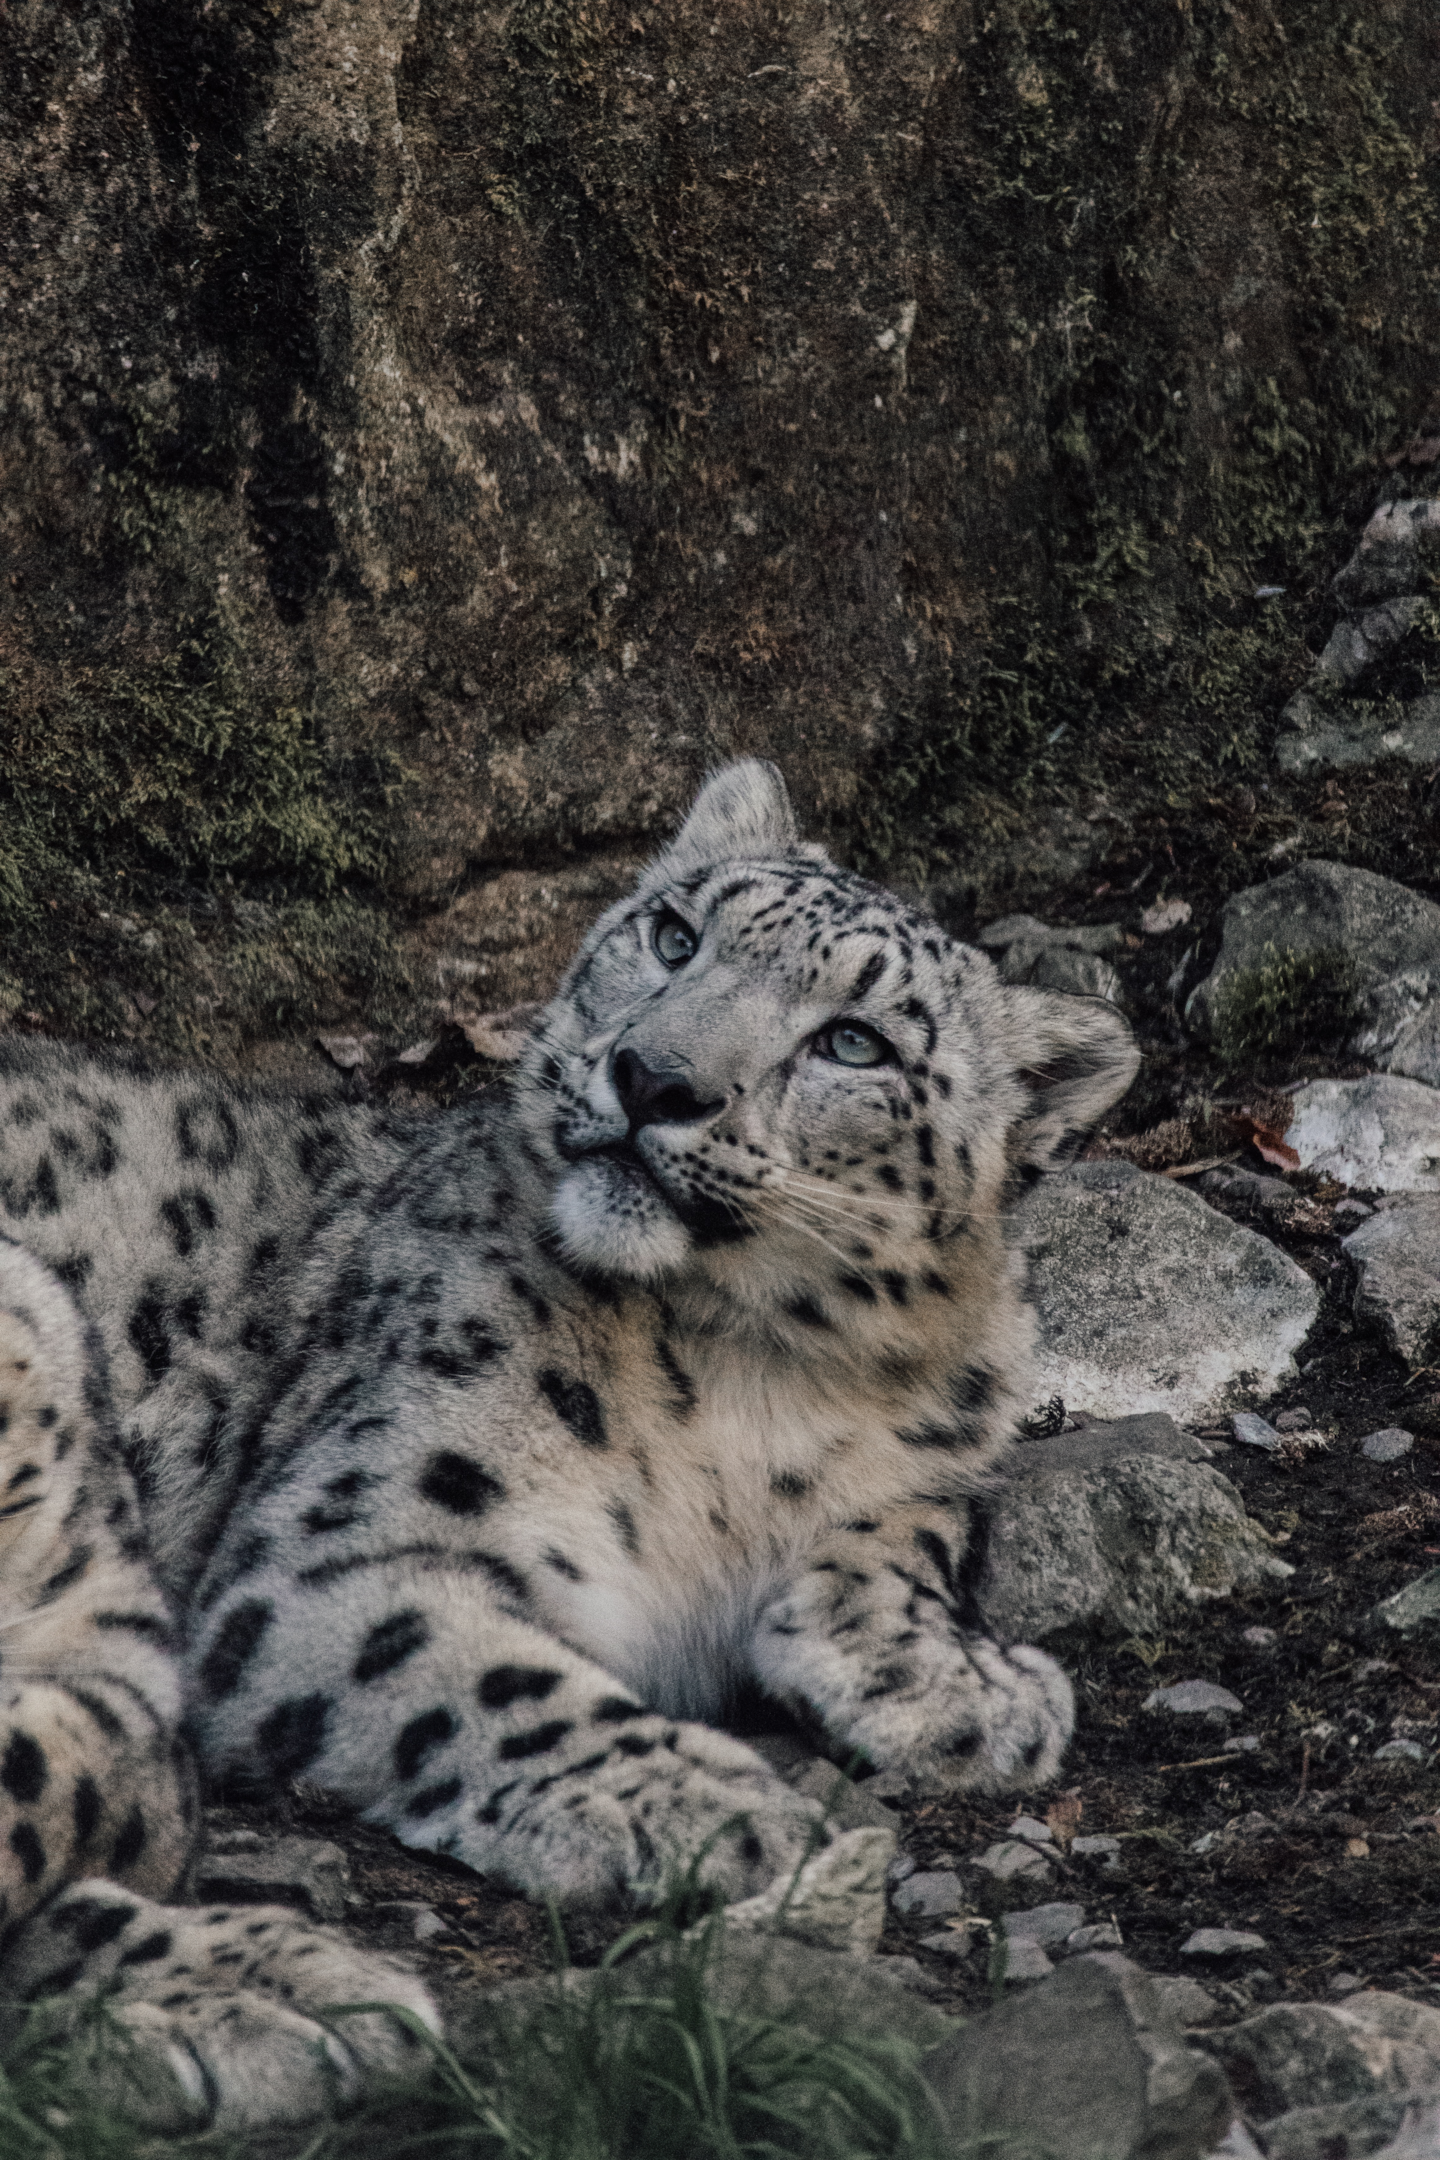 A snow leopard walking in the wild, with its magnificent body and long tail